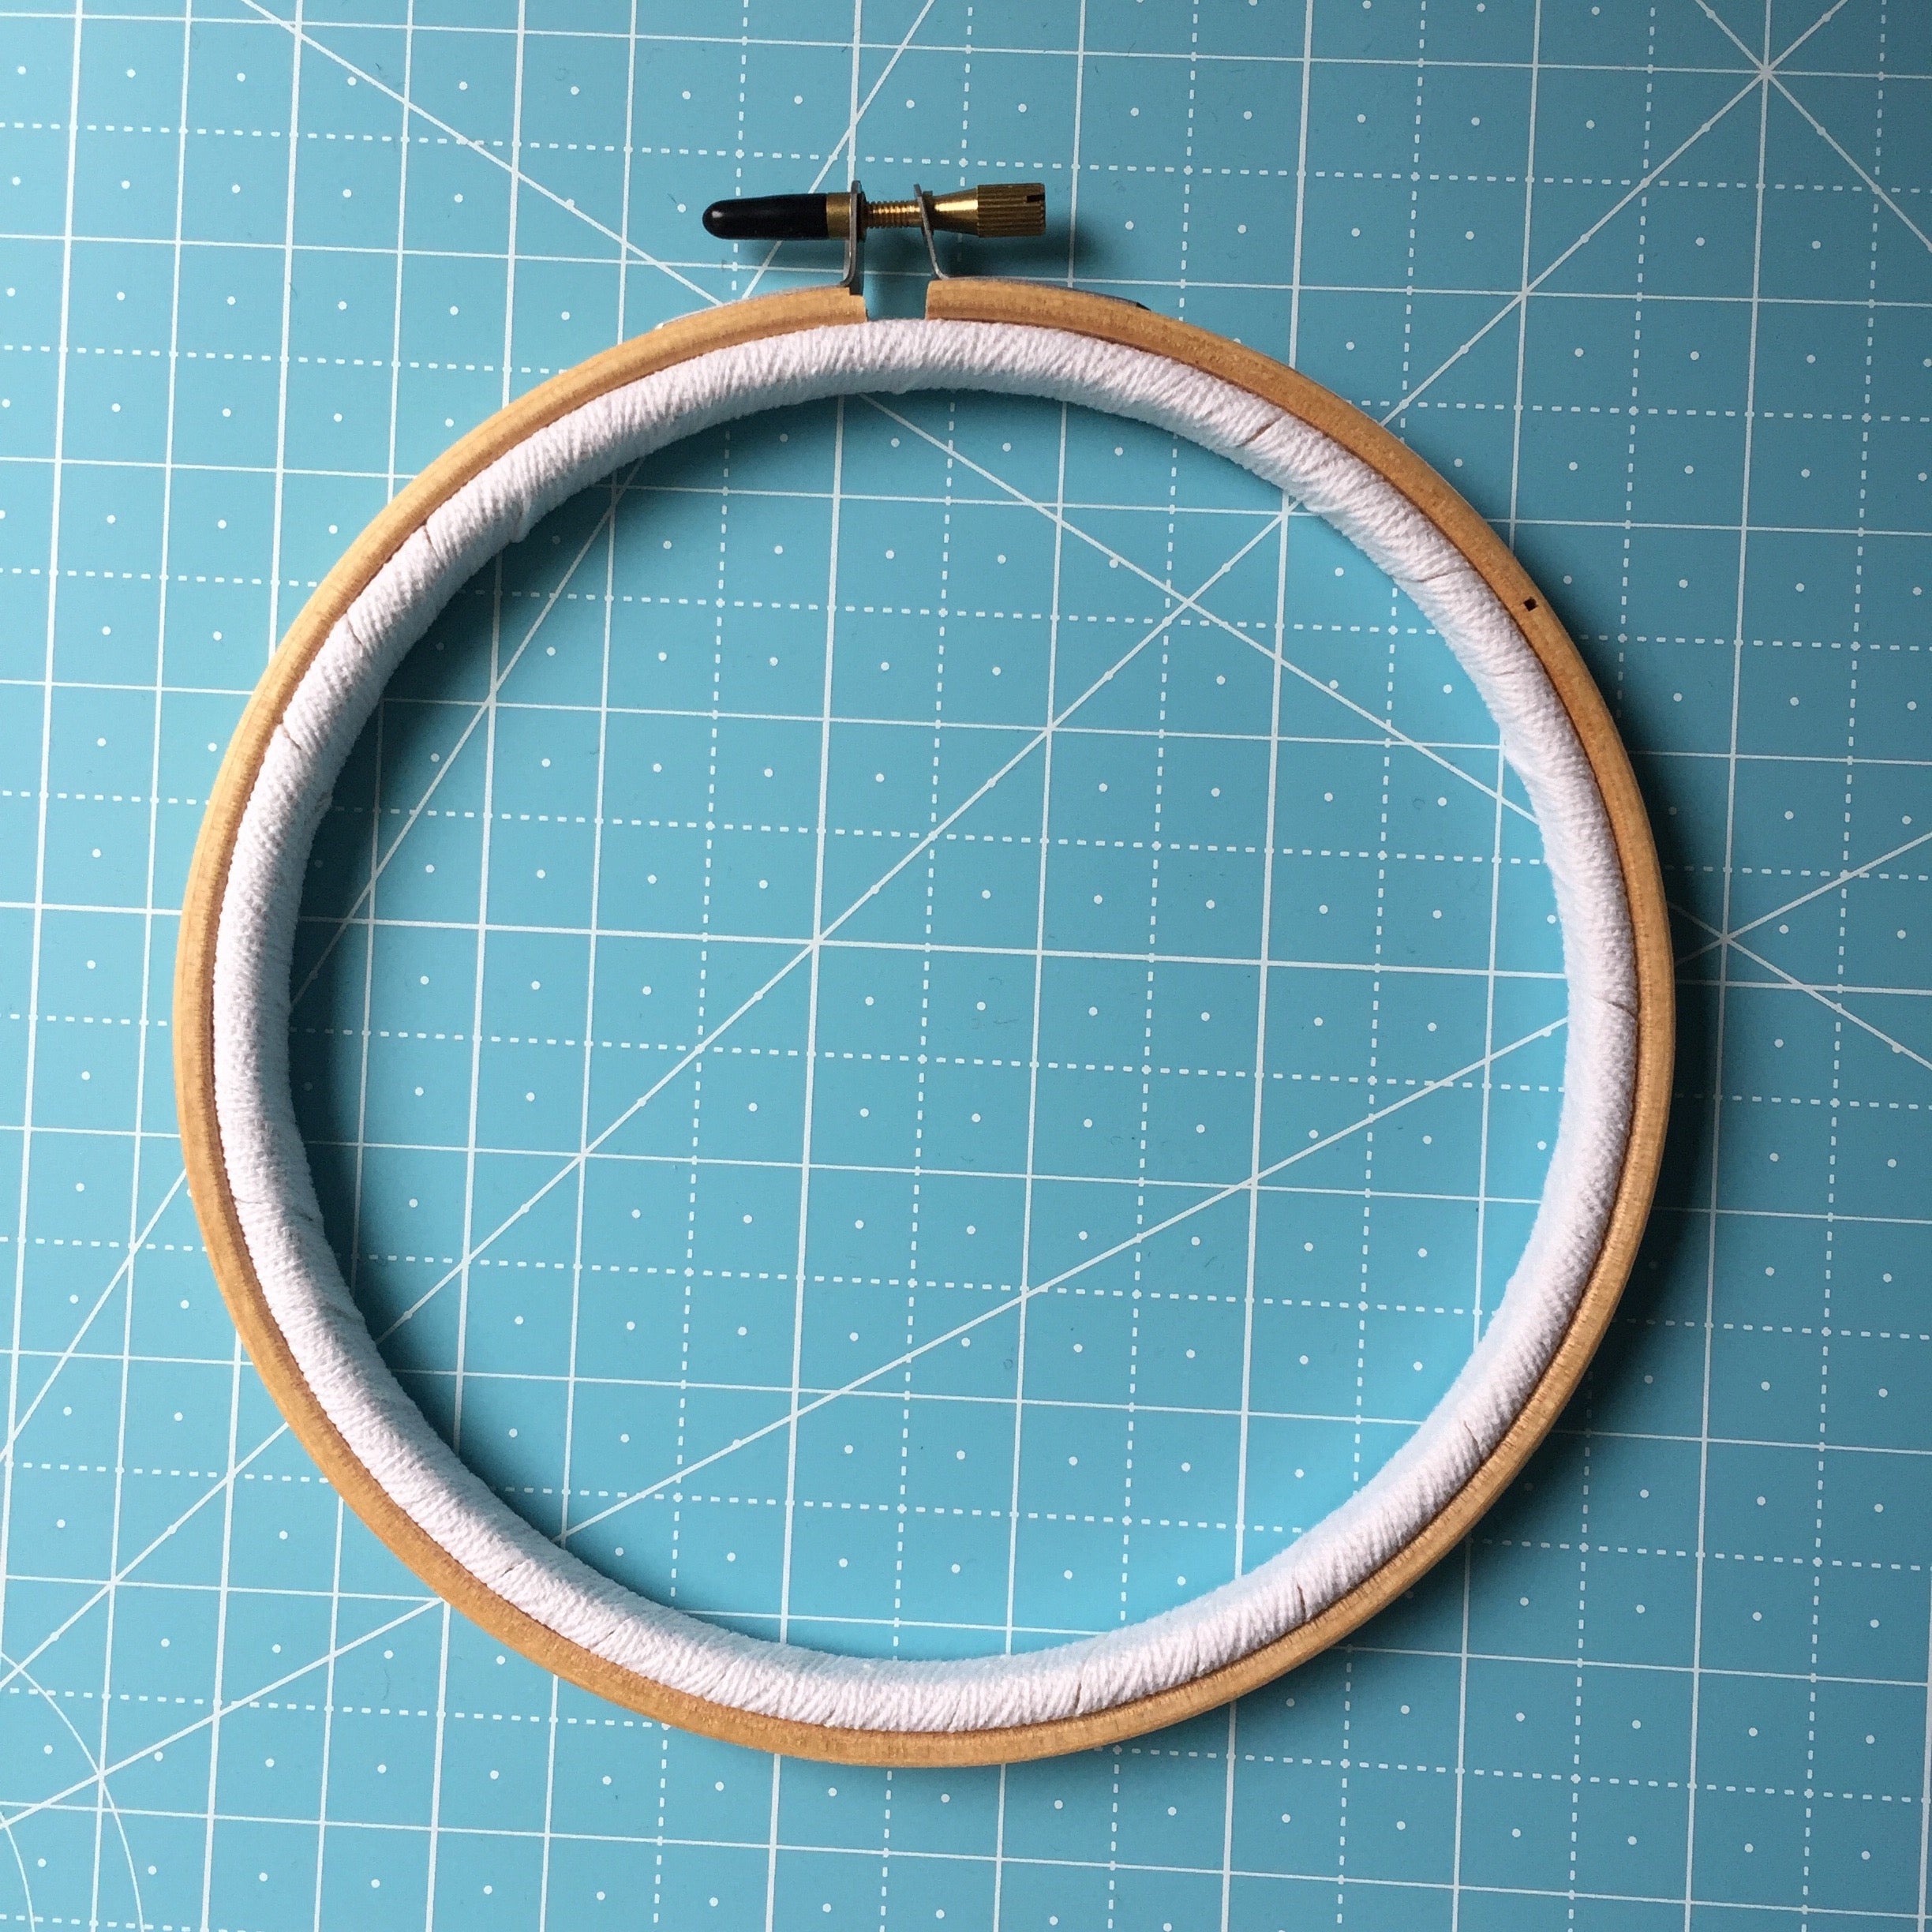 96 Pieces Sewing & Embroidery Hoop Frame - Sewing Supplies - at 